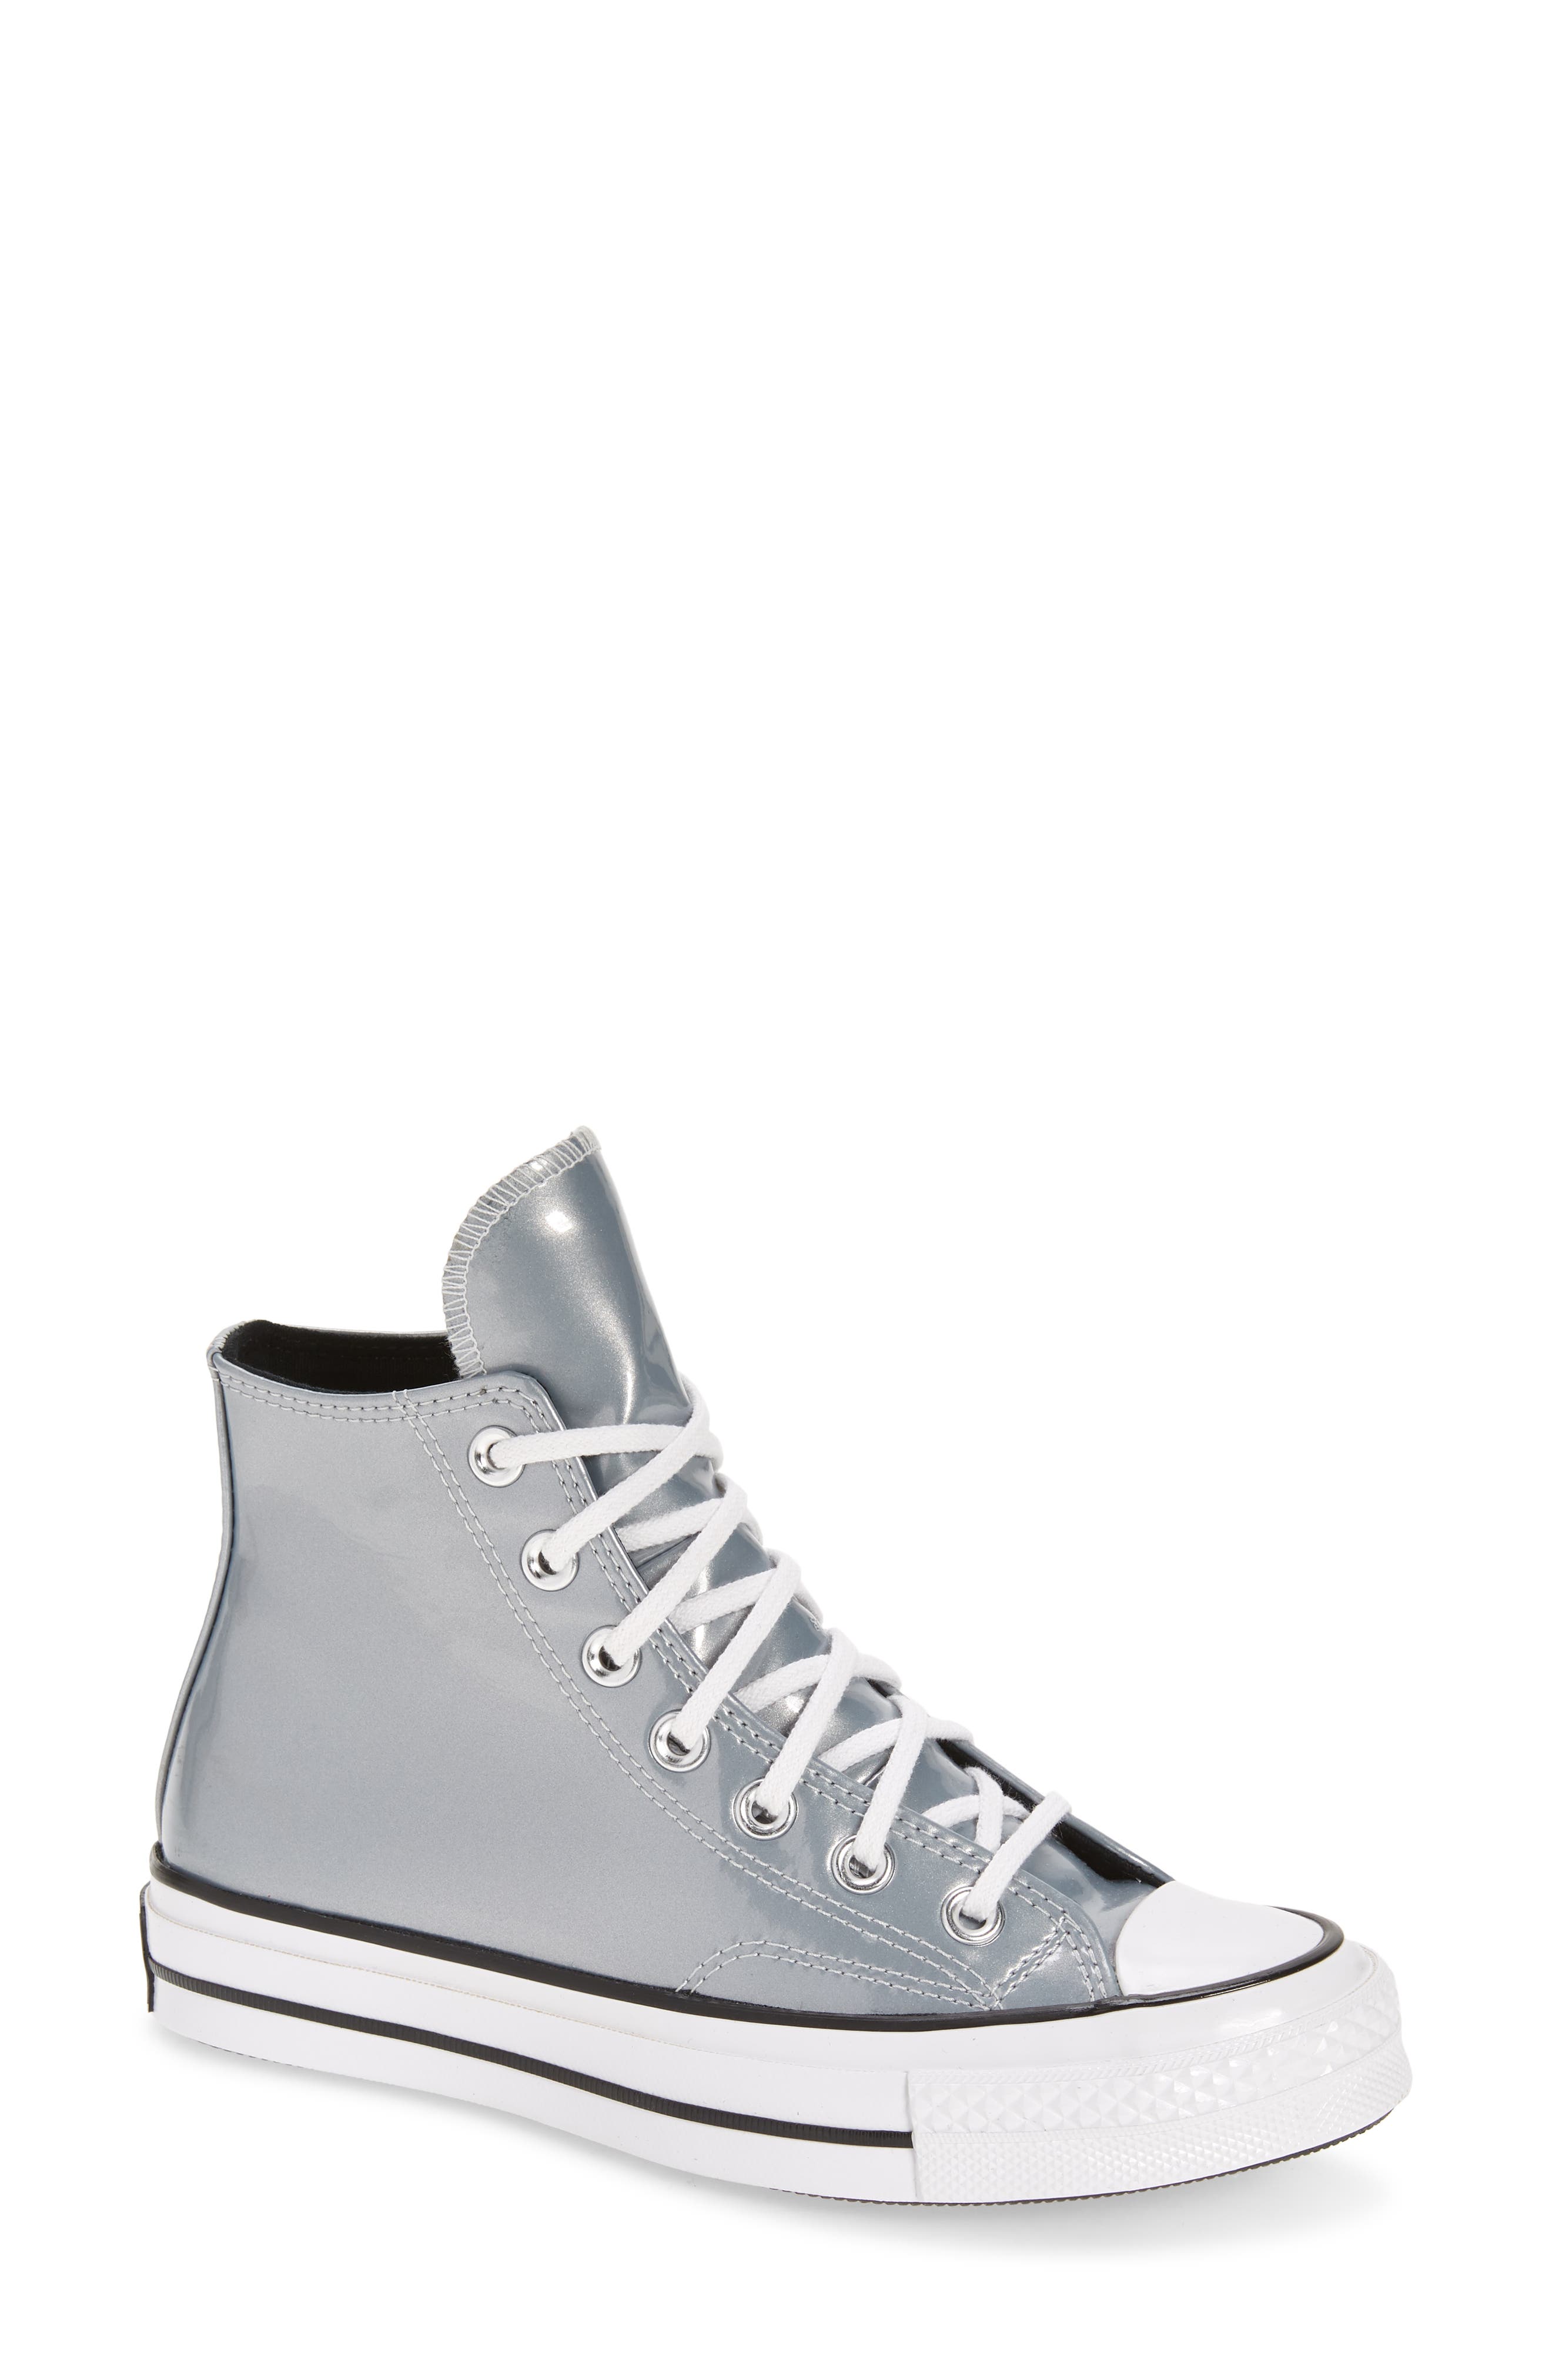 converse high tops clearance